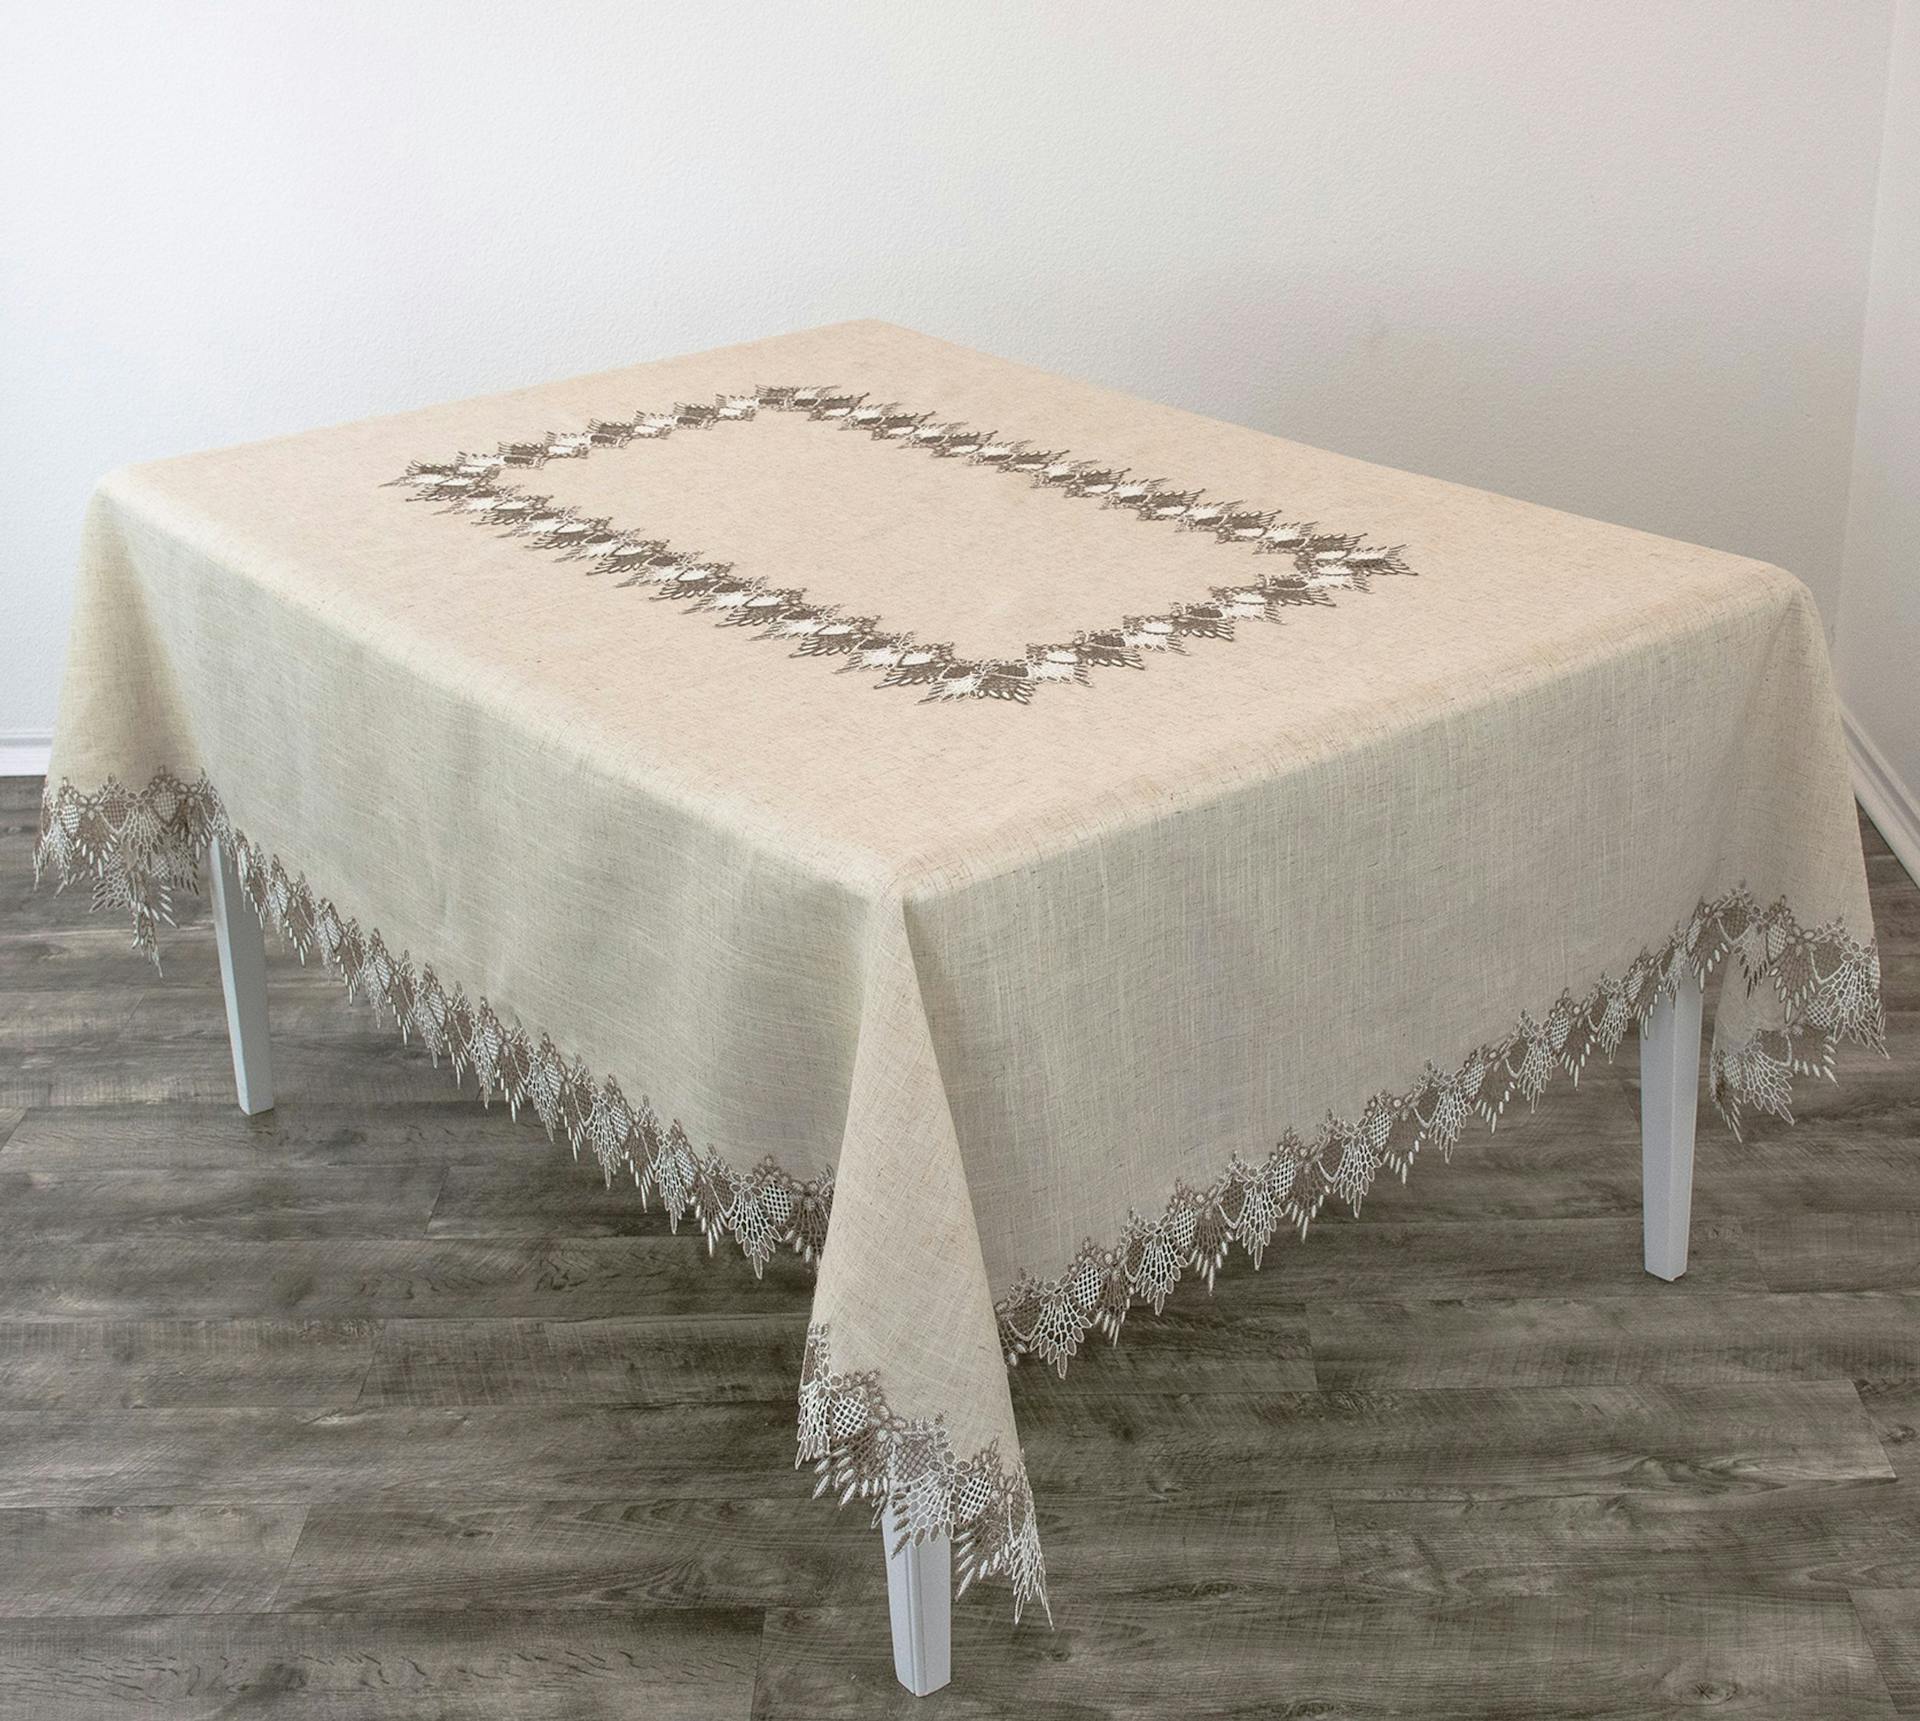 Neutral Earth Tone Beige Lace Tablecloth (70" x 90")